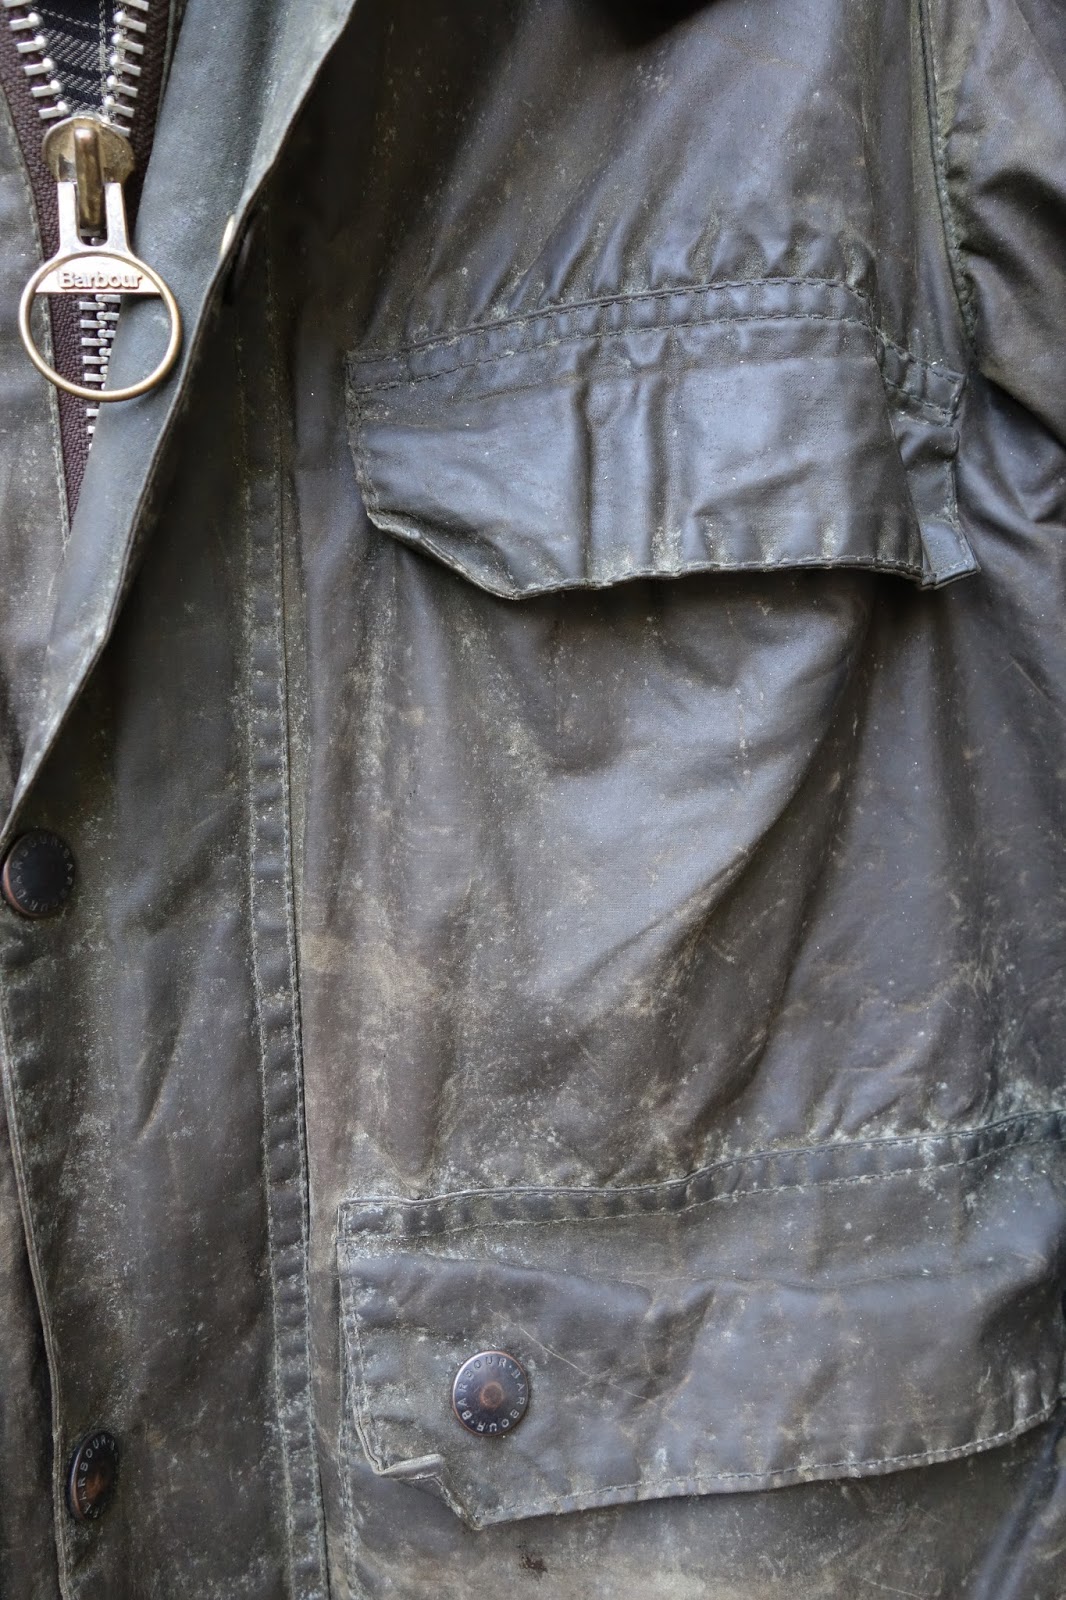 how to clean a barbour jacket